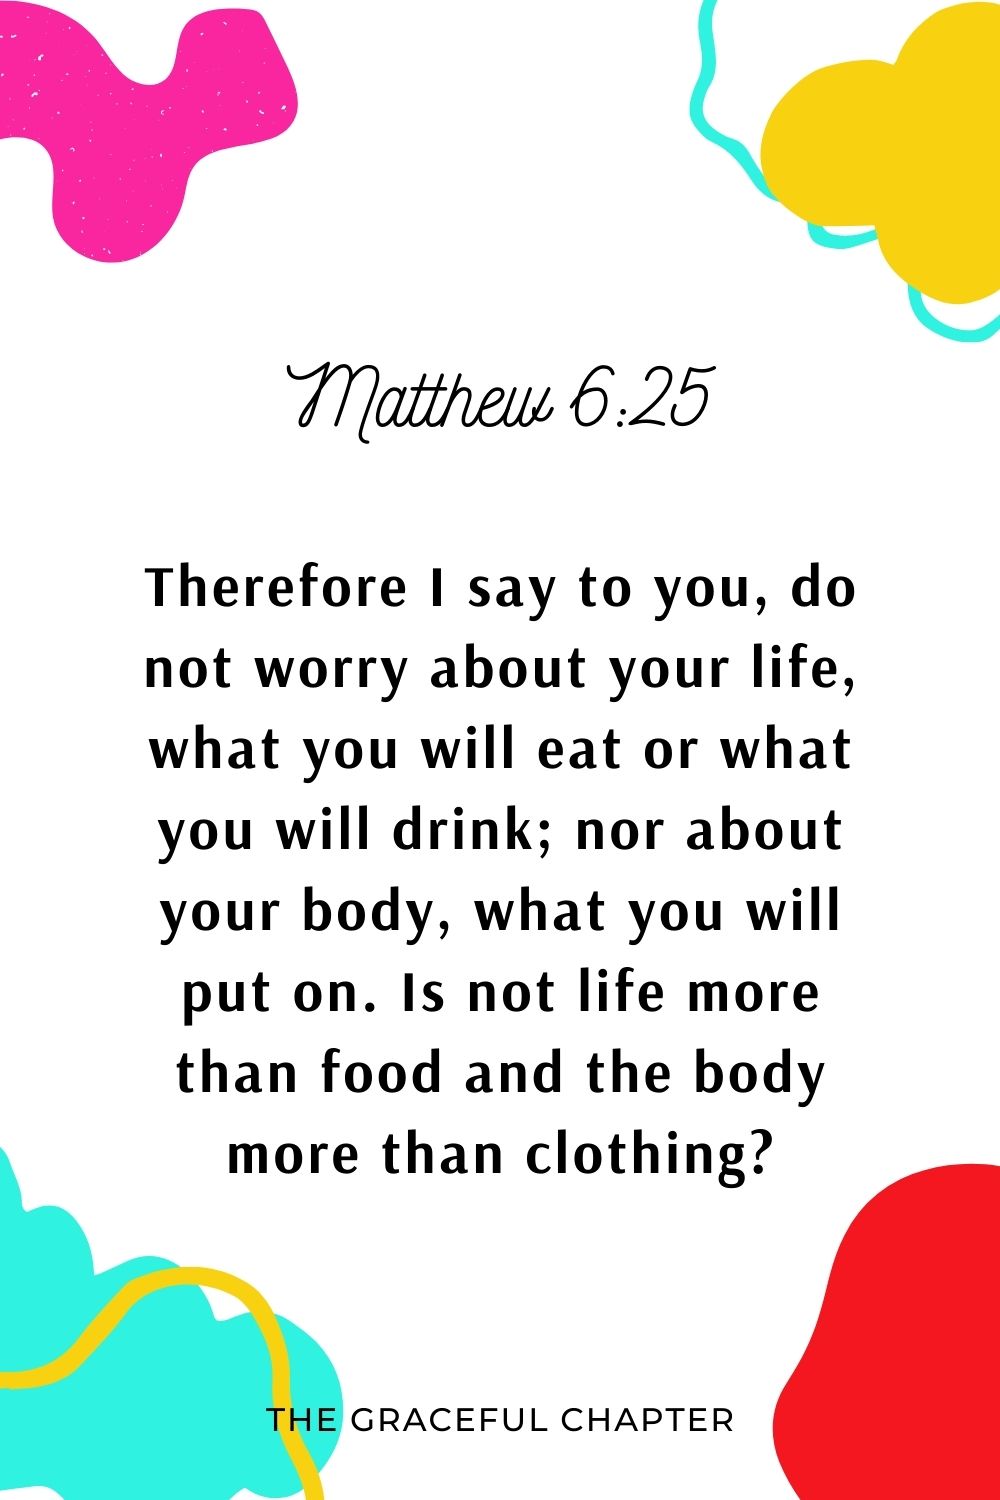 Therefore I say to you, do not worry about your life, what you will eat or what you will drink; nor about your body, what you will put on. Is not life more than food and the body more than clothing? Matthew 6:25